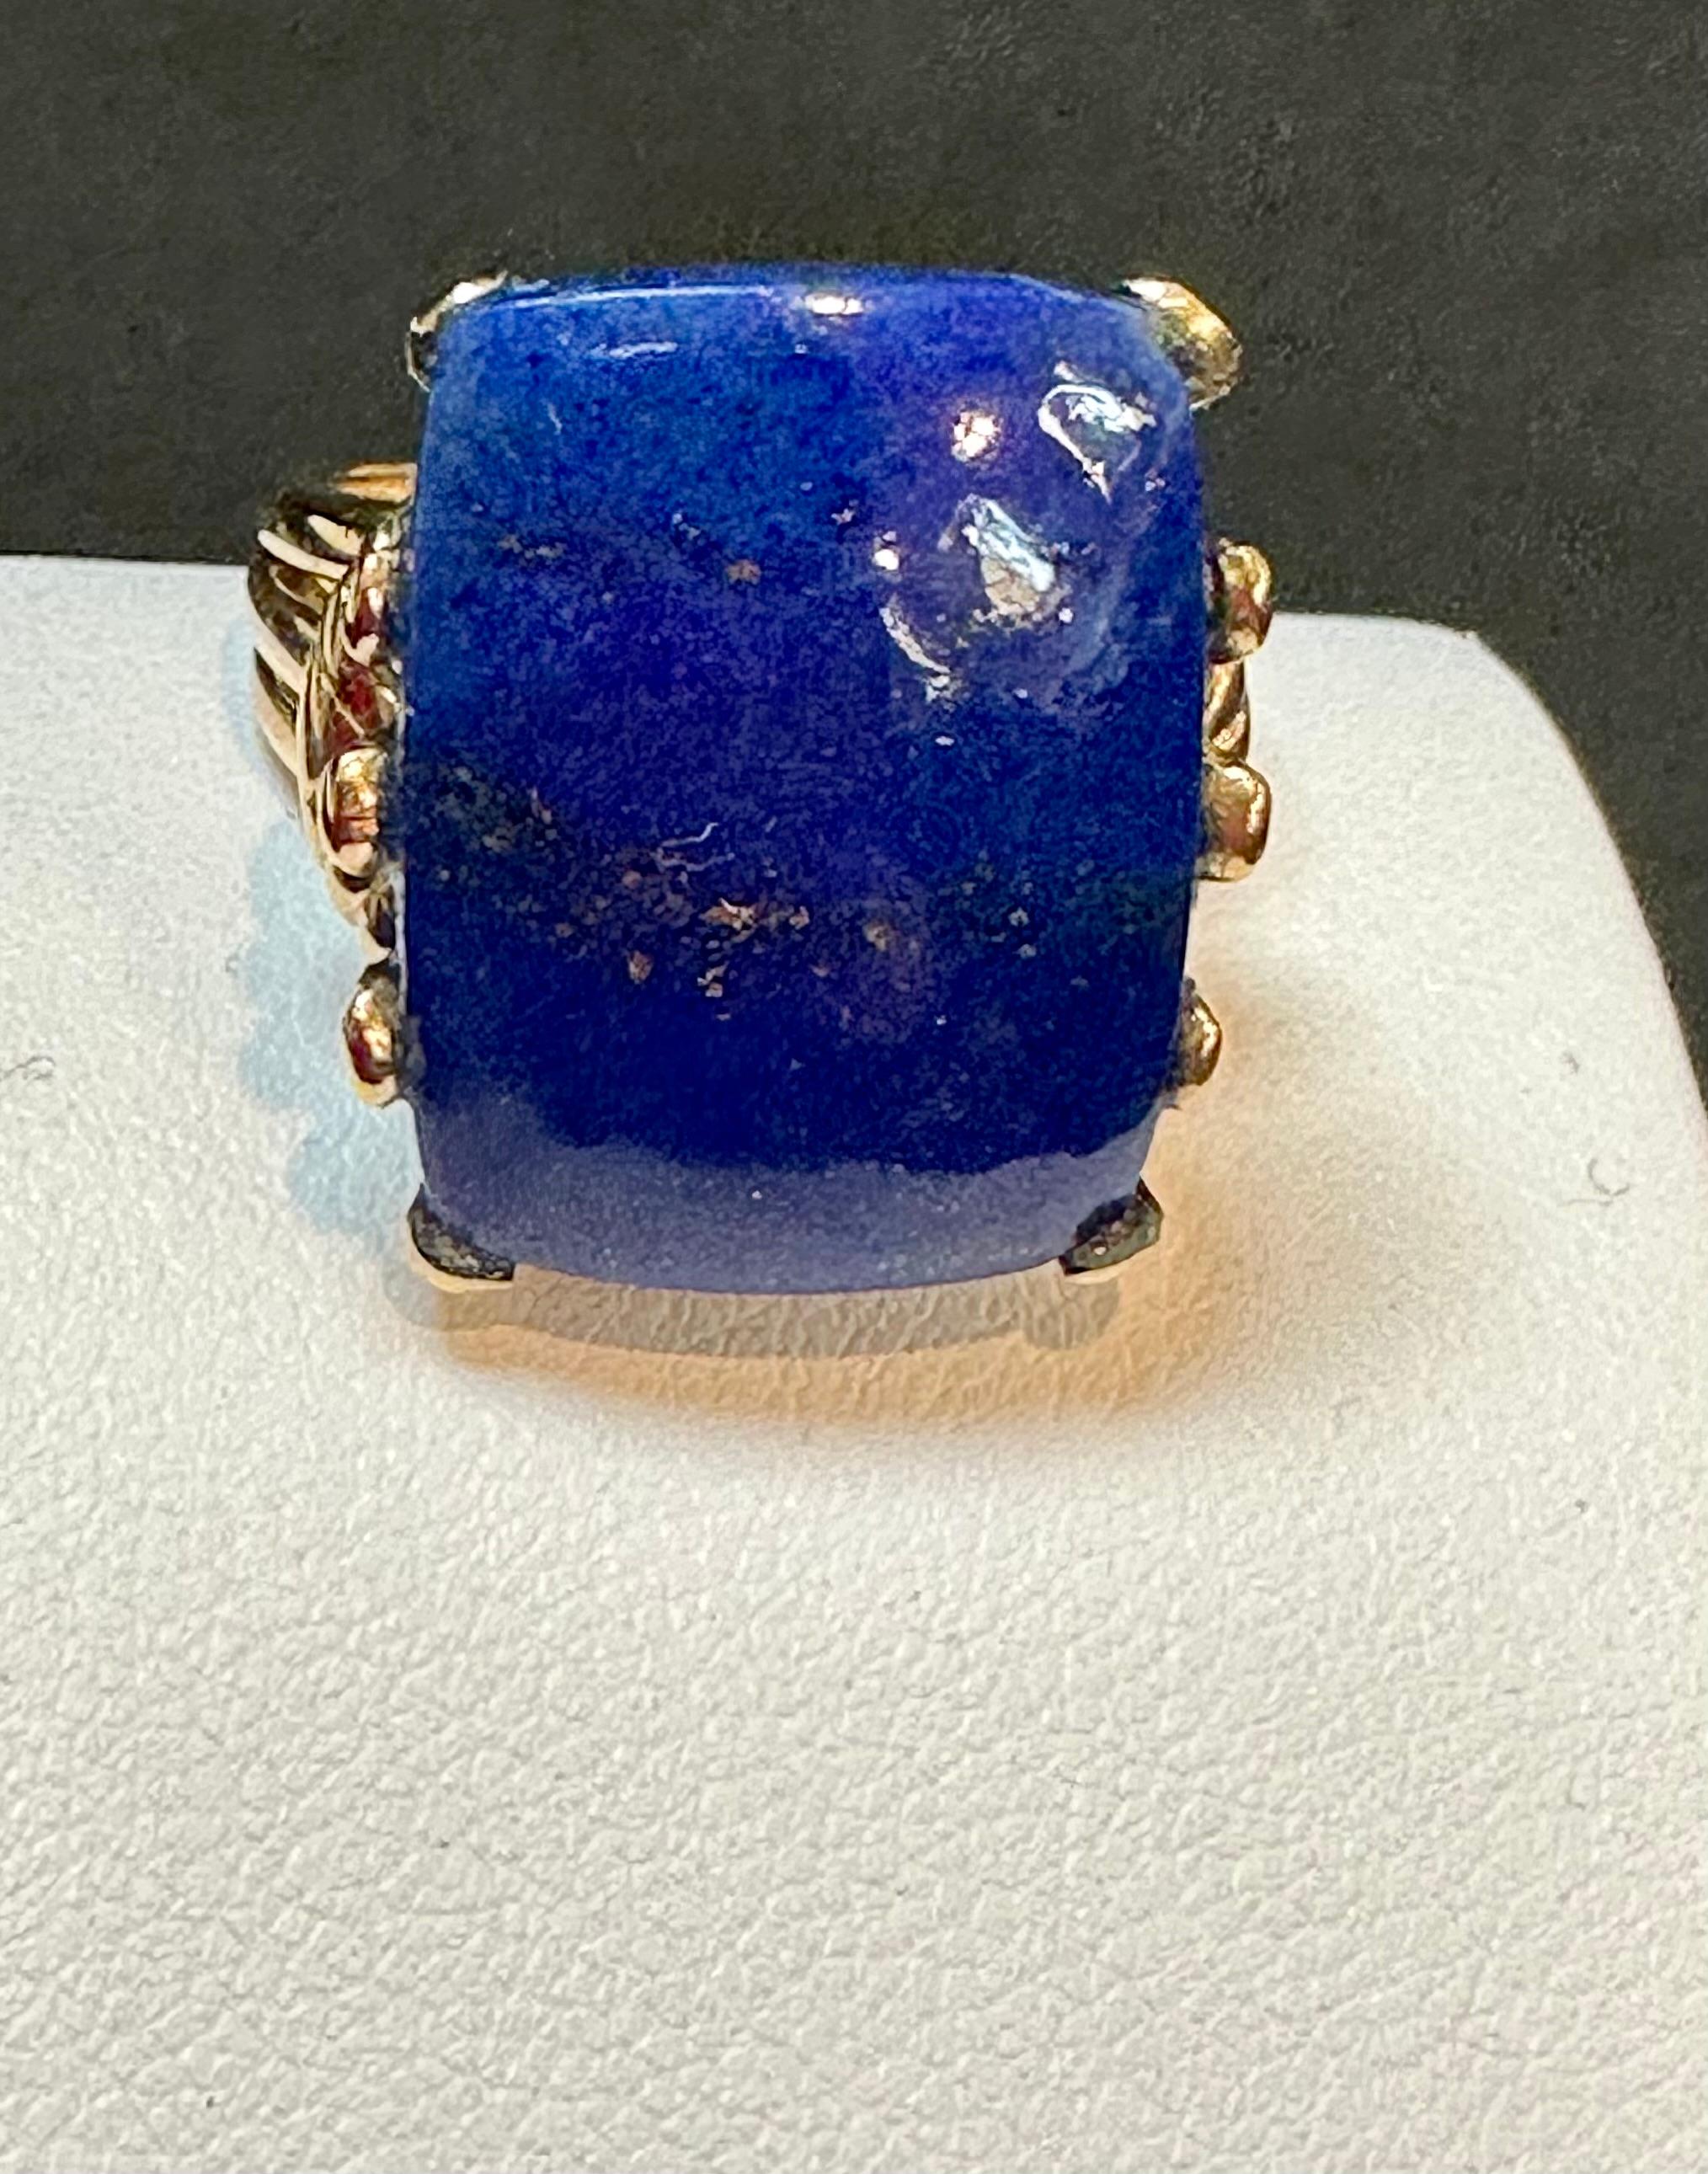 15 Ct Emerald cut Natural Lapis Lazuli Ring in 14 Kt Yellow Gold, Estate Size 7 For Sale 1